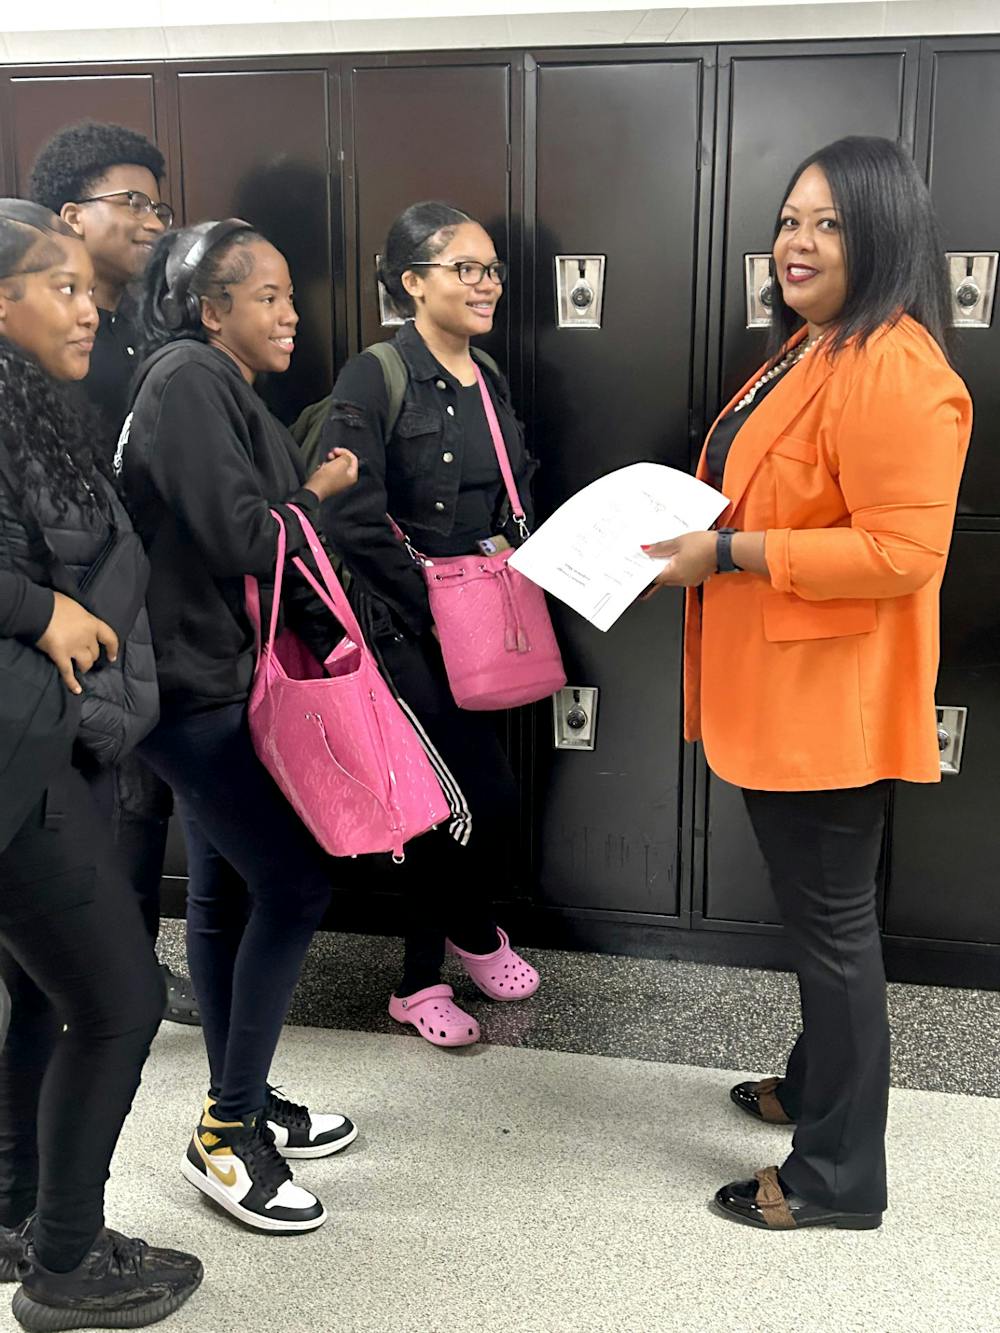 <blockquote class="text-align-left">New assistant principal Tisha Lewis gives students morning encouragement. PHOTO BY CRUSADERS’ CHRONICLE&nbsp;</blockquote>